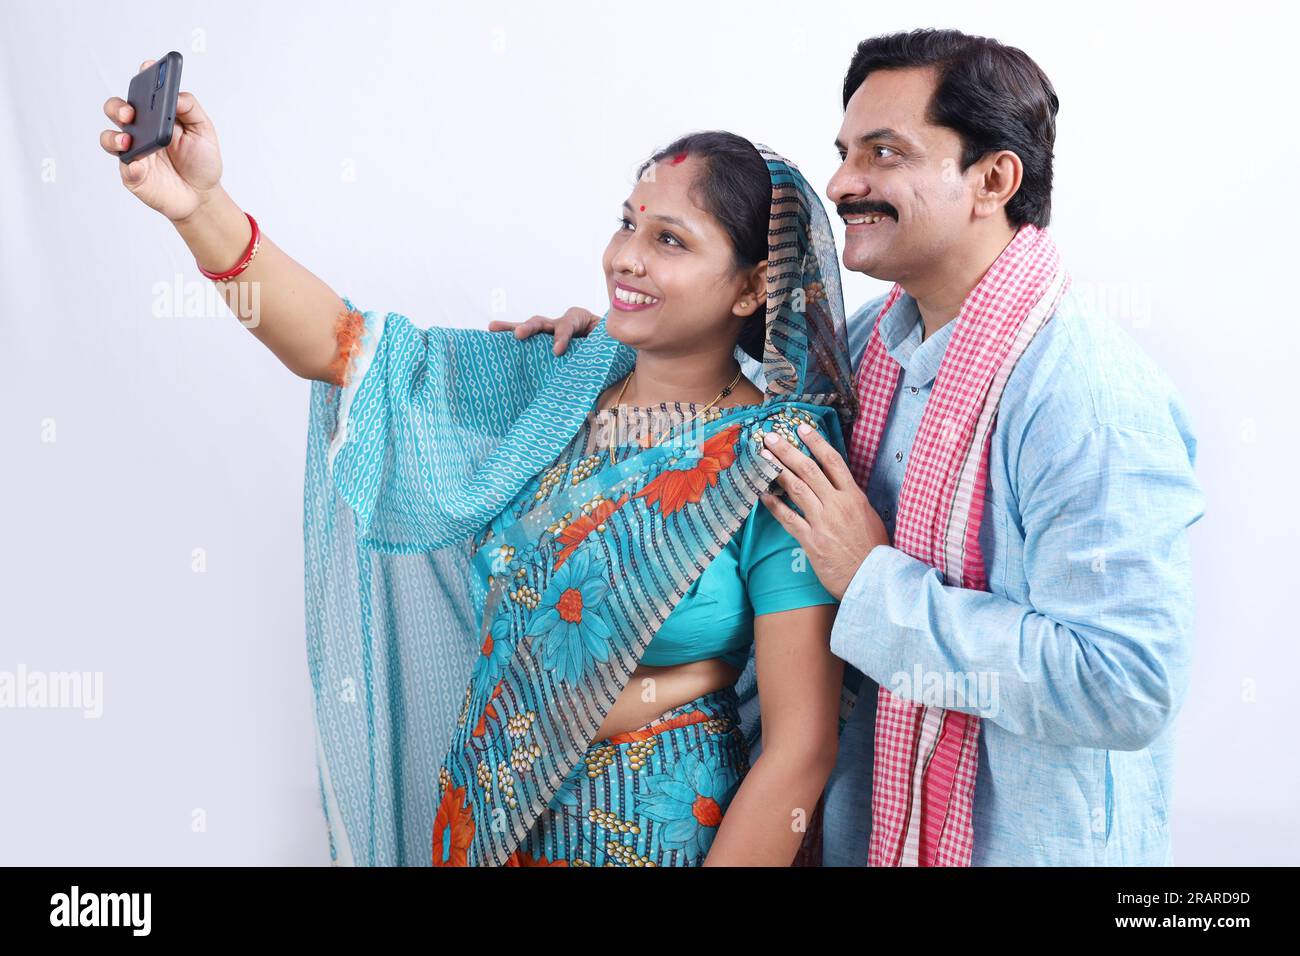 Rural Indian Village Couple Happily Taking A Selfie From A Mobile Phone Woman Wearing Saree And 